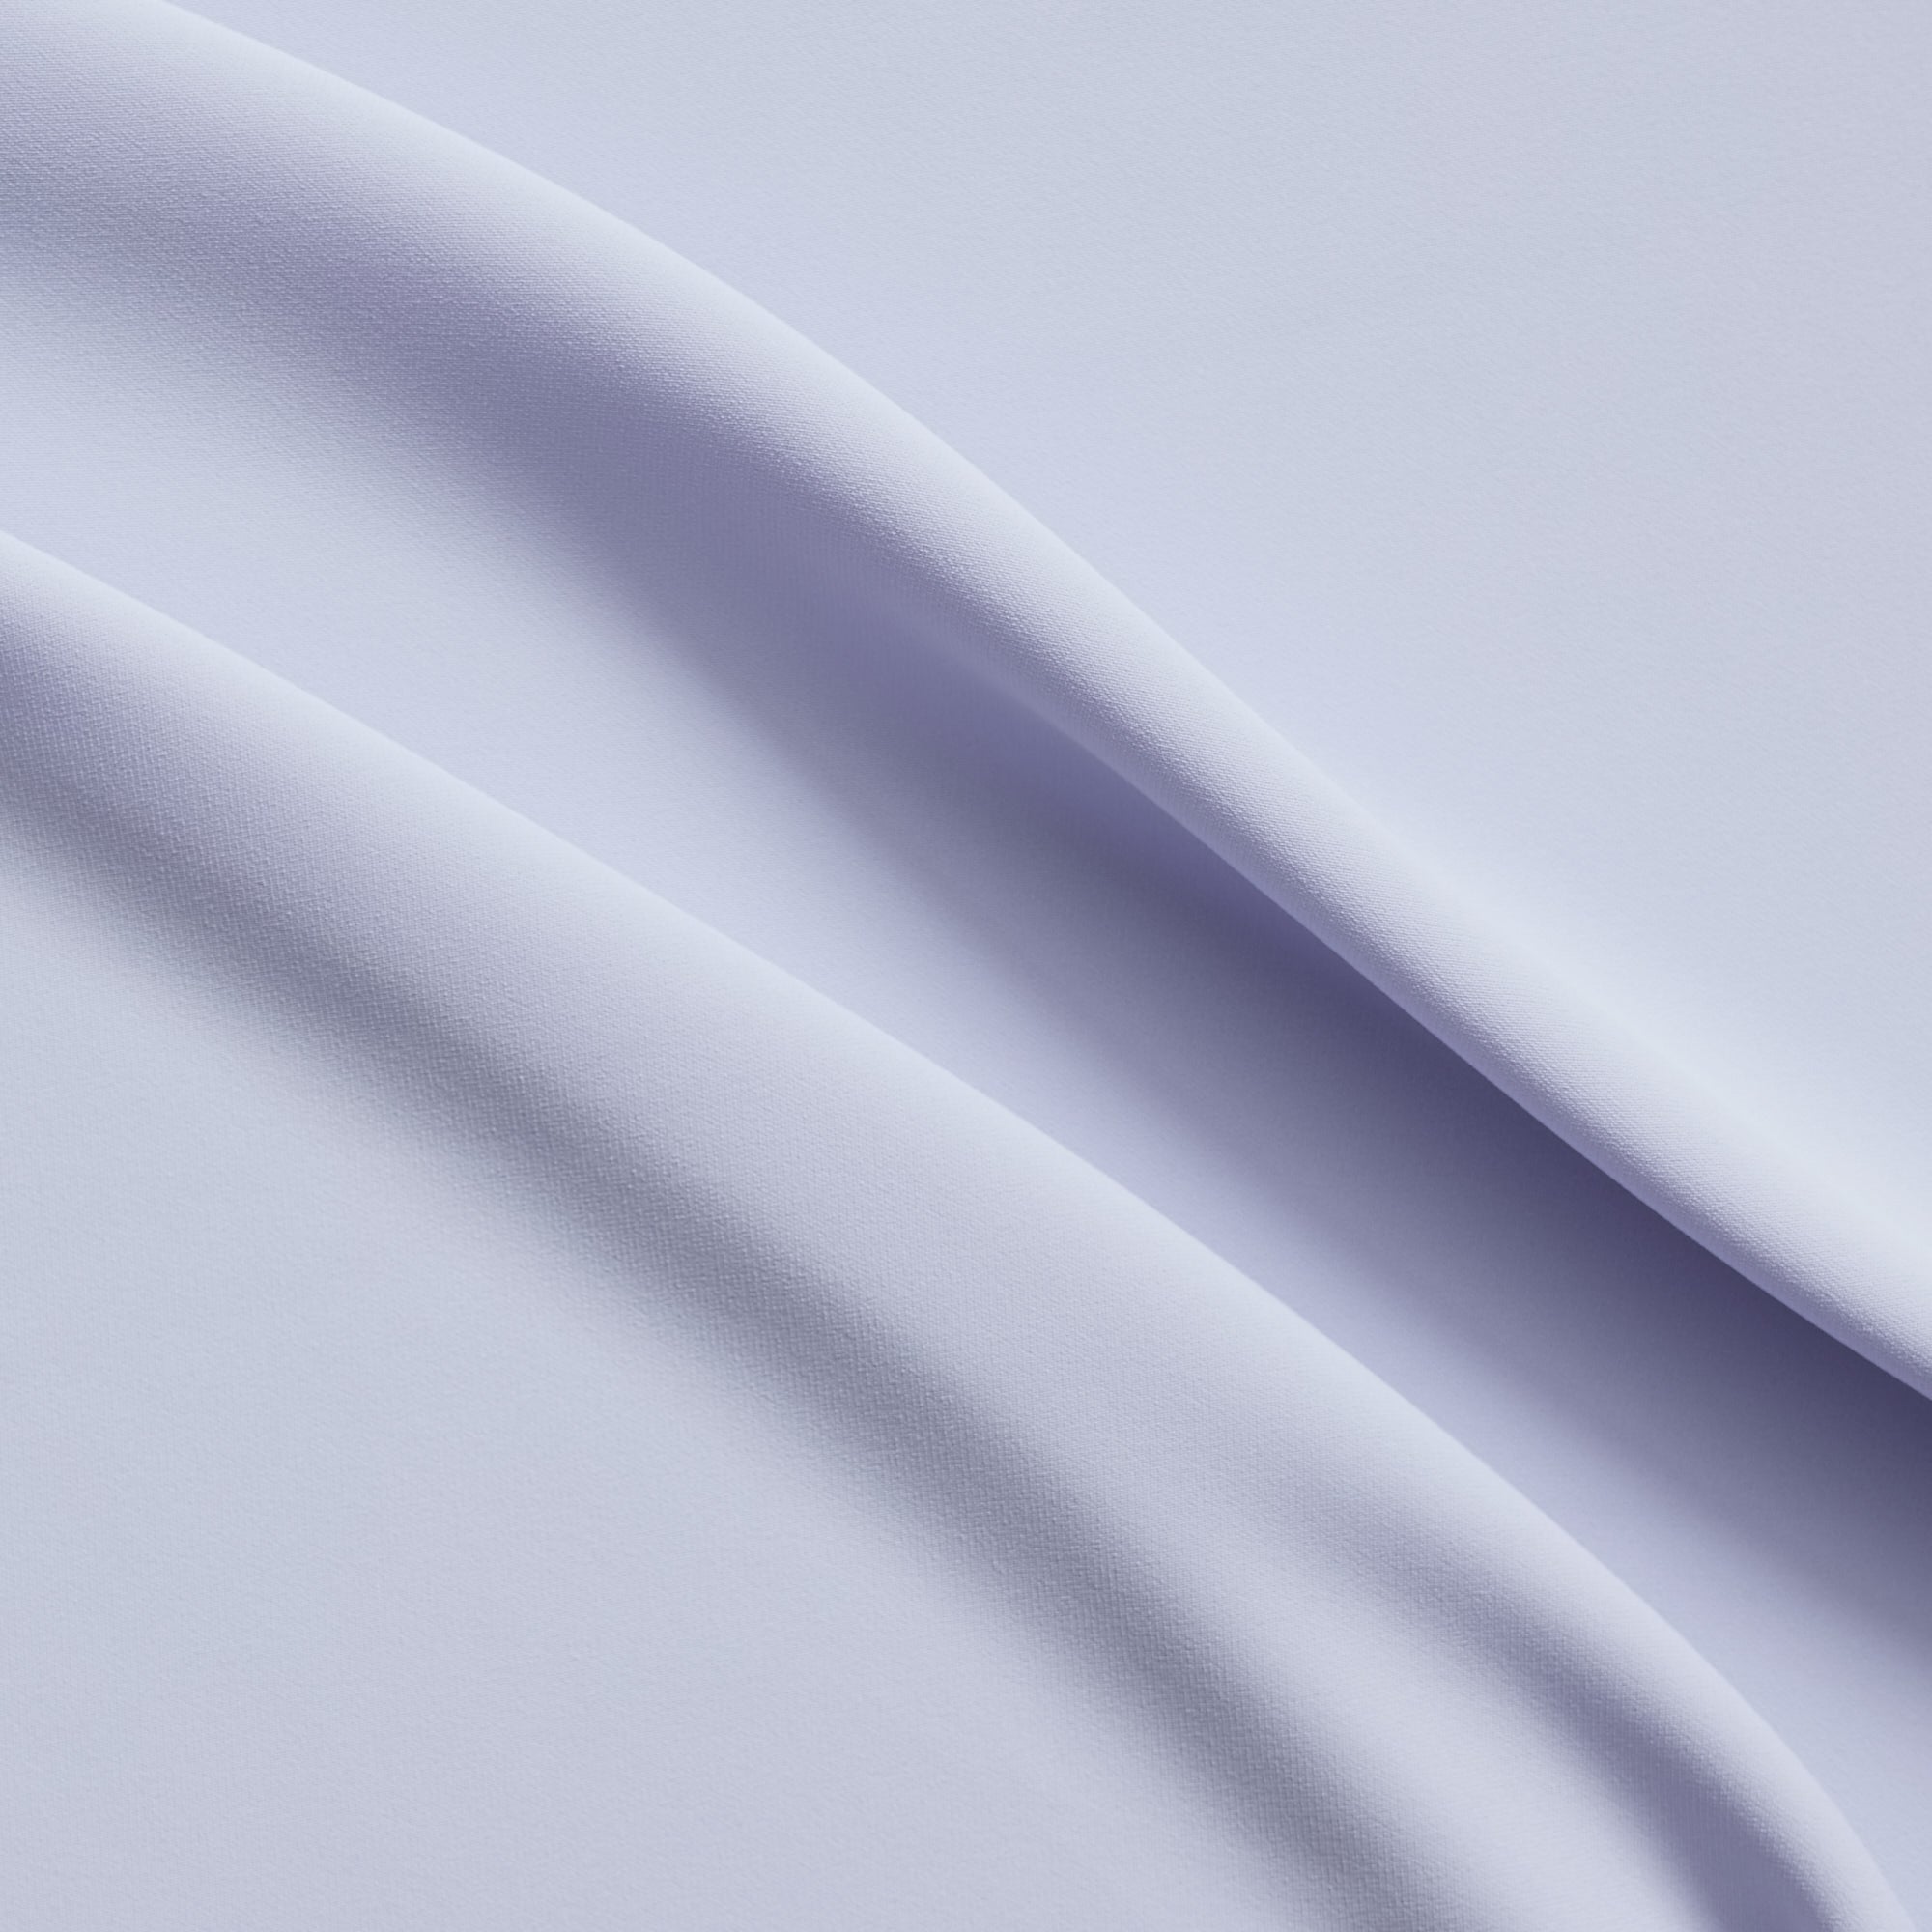 sensation illustrating the blue color version of a medium weight silk faille-like pure polyester  with weft natural stretch and fluid drape